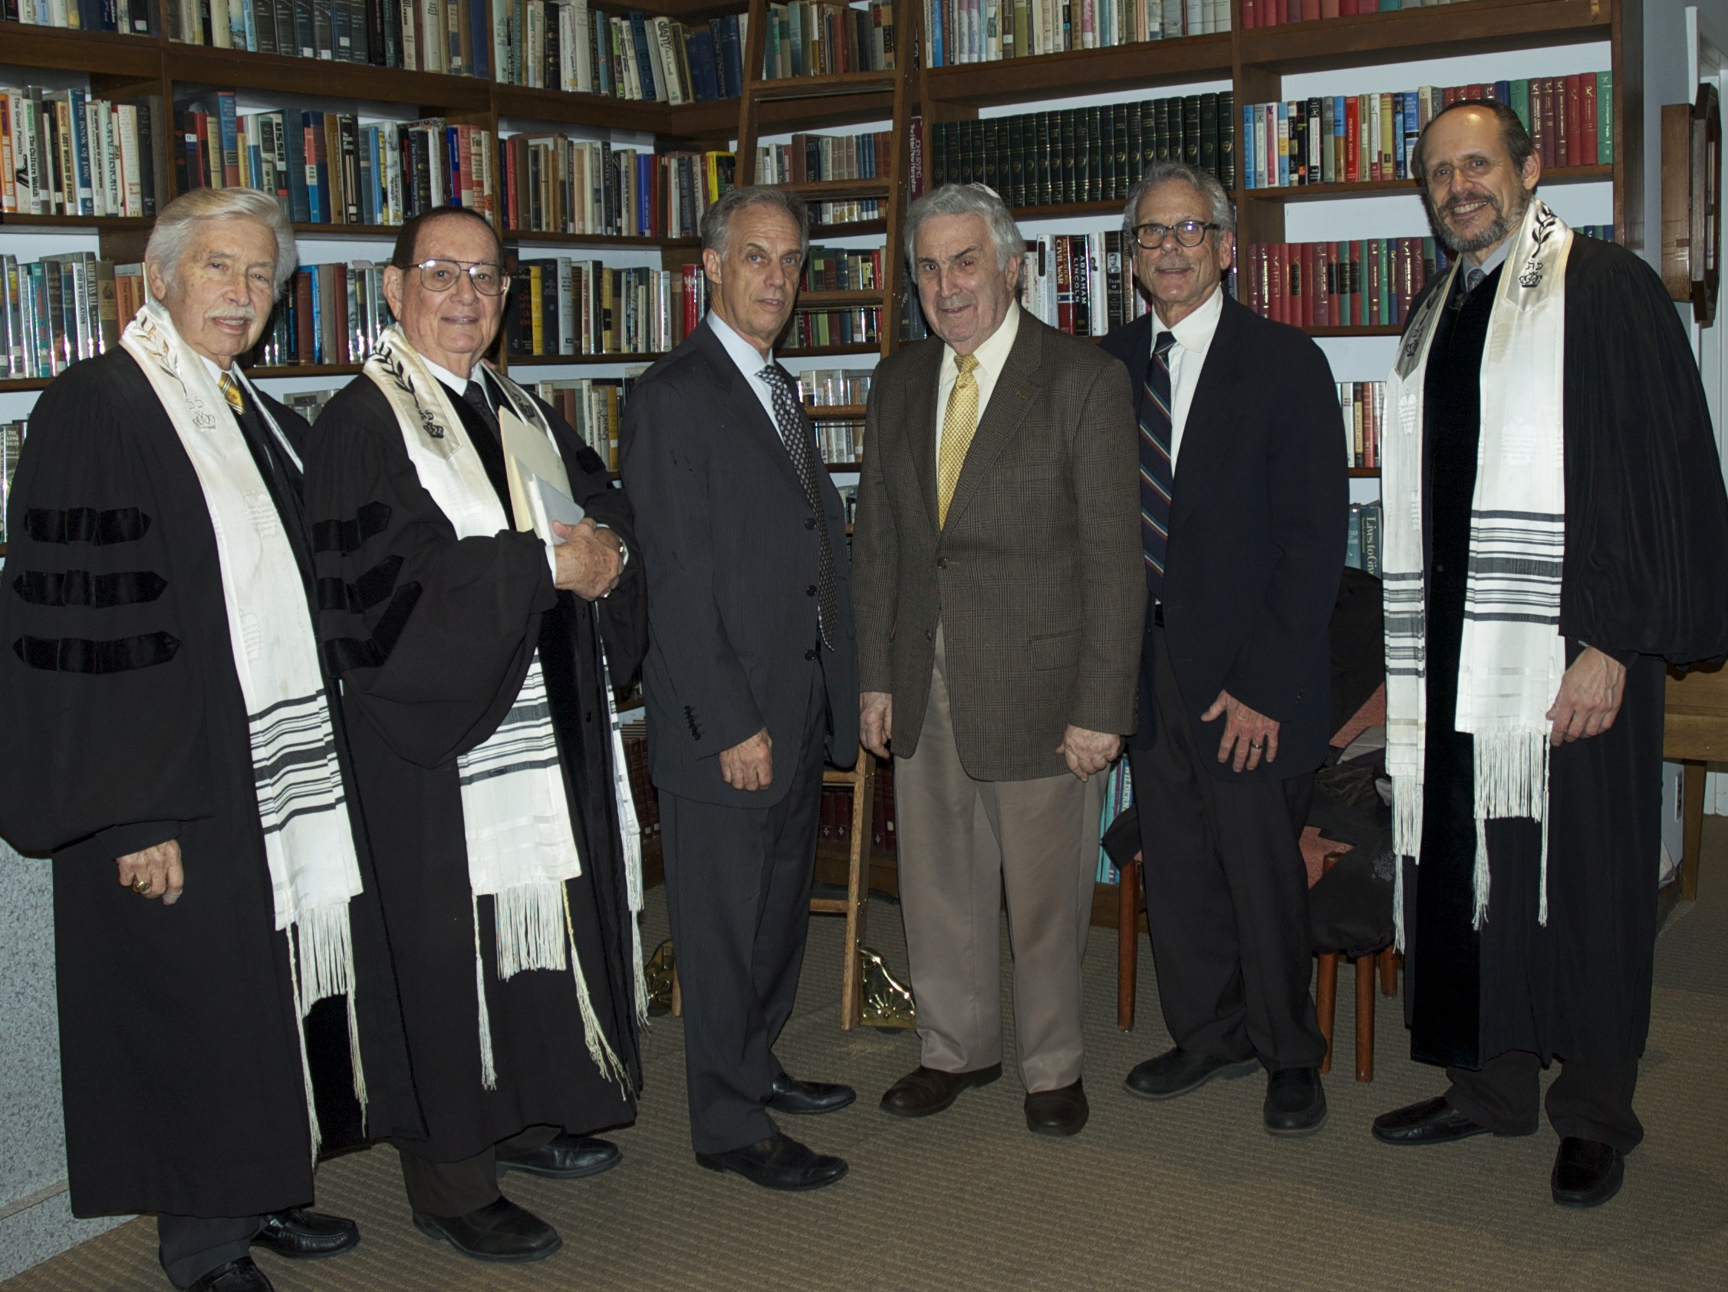 Arthur Flug posed for a photograph with religious and temple leaders before Temple Emanuel's Kristallnacht service. (Photo courtesy of Temple Emanuel)